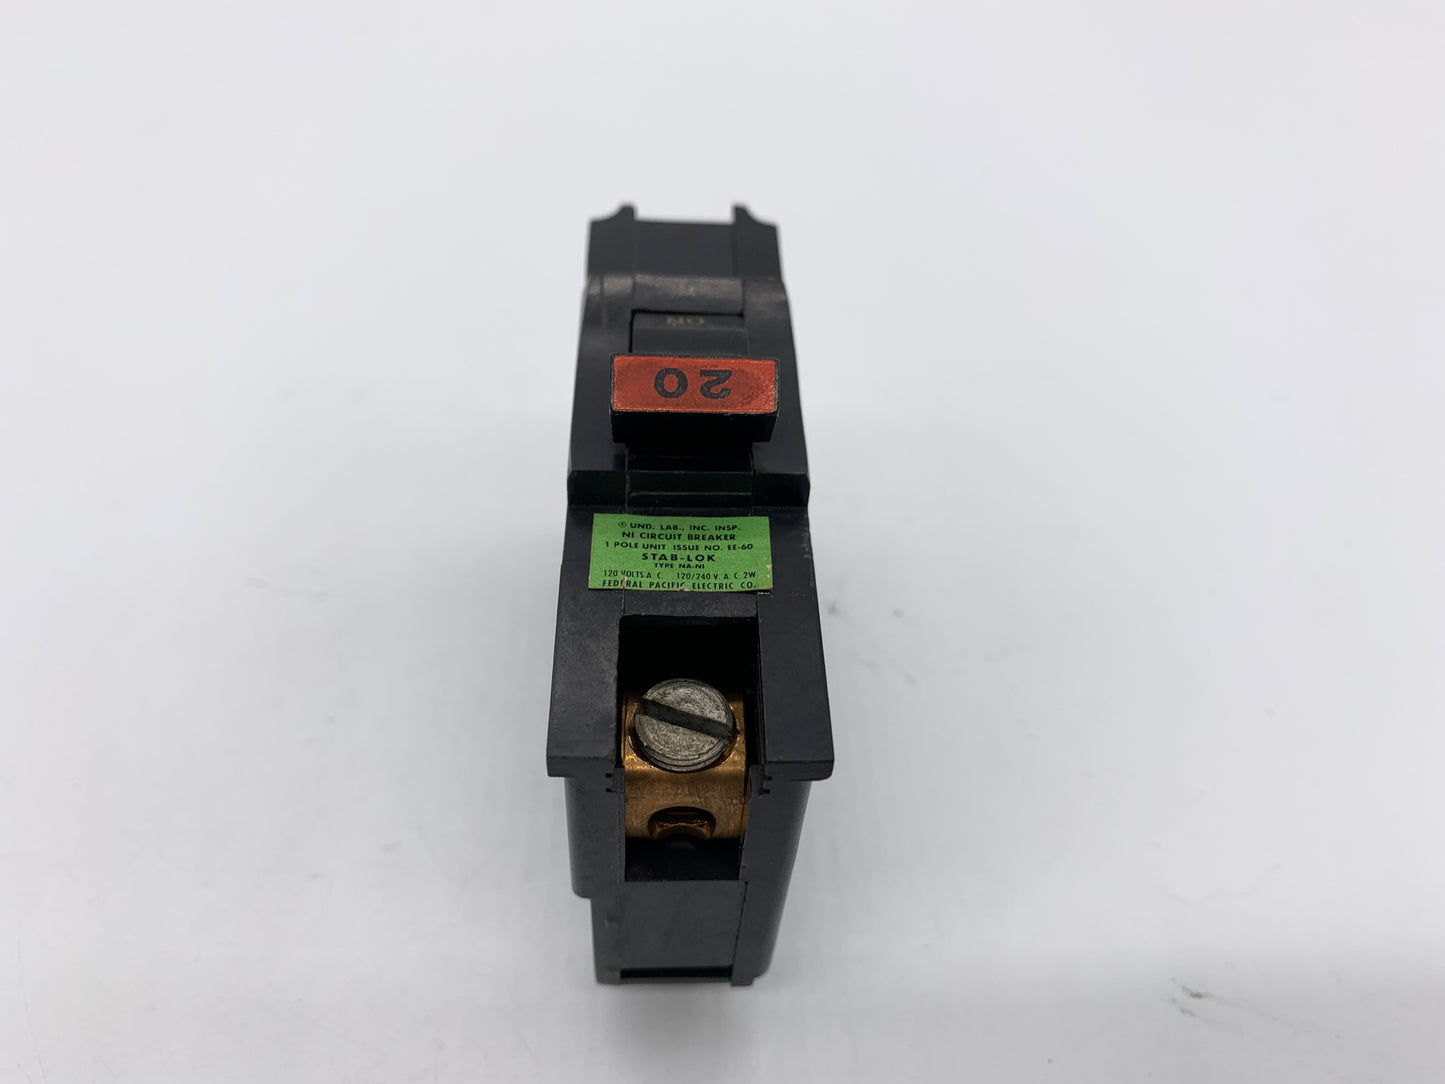 FEDERAL PACIFIC NA120 20A 1P STAB-LOK THICK SERIES CIRCUIT BREAKER - Reconditioned